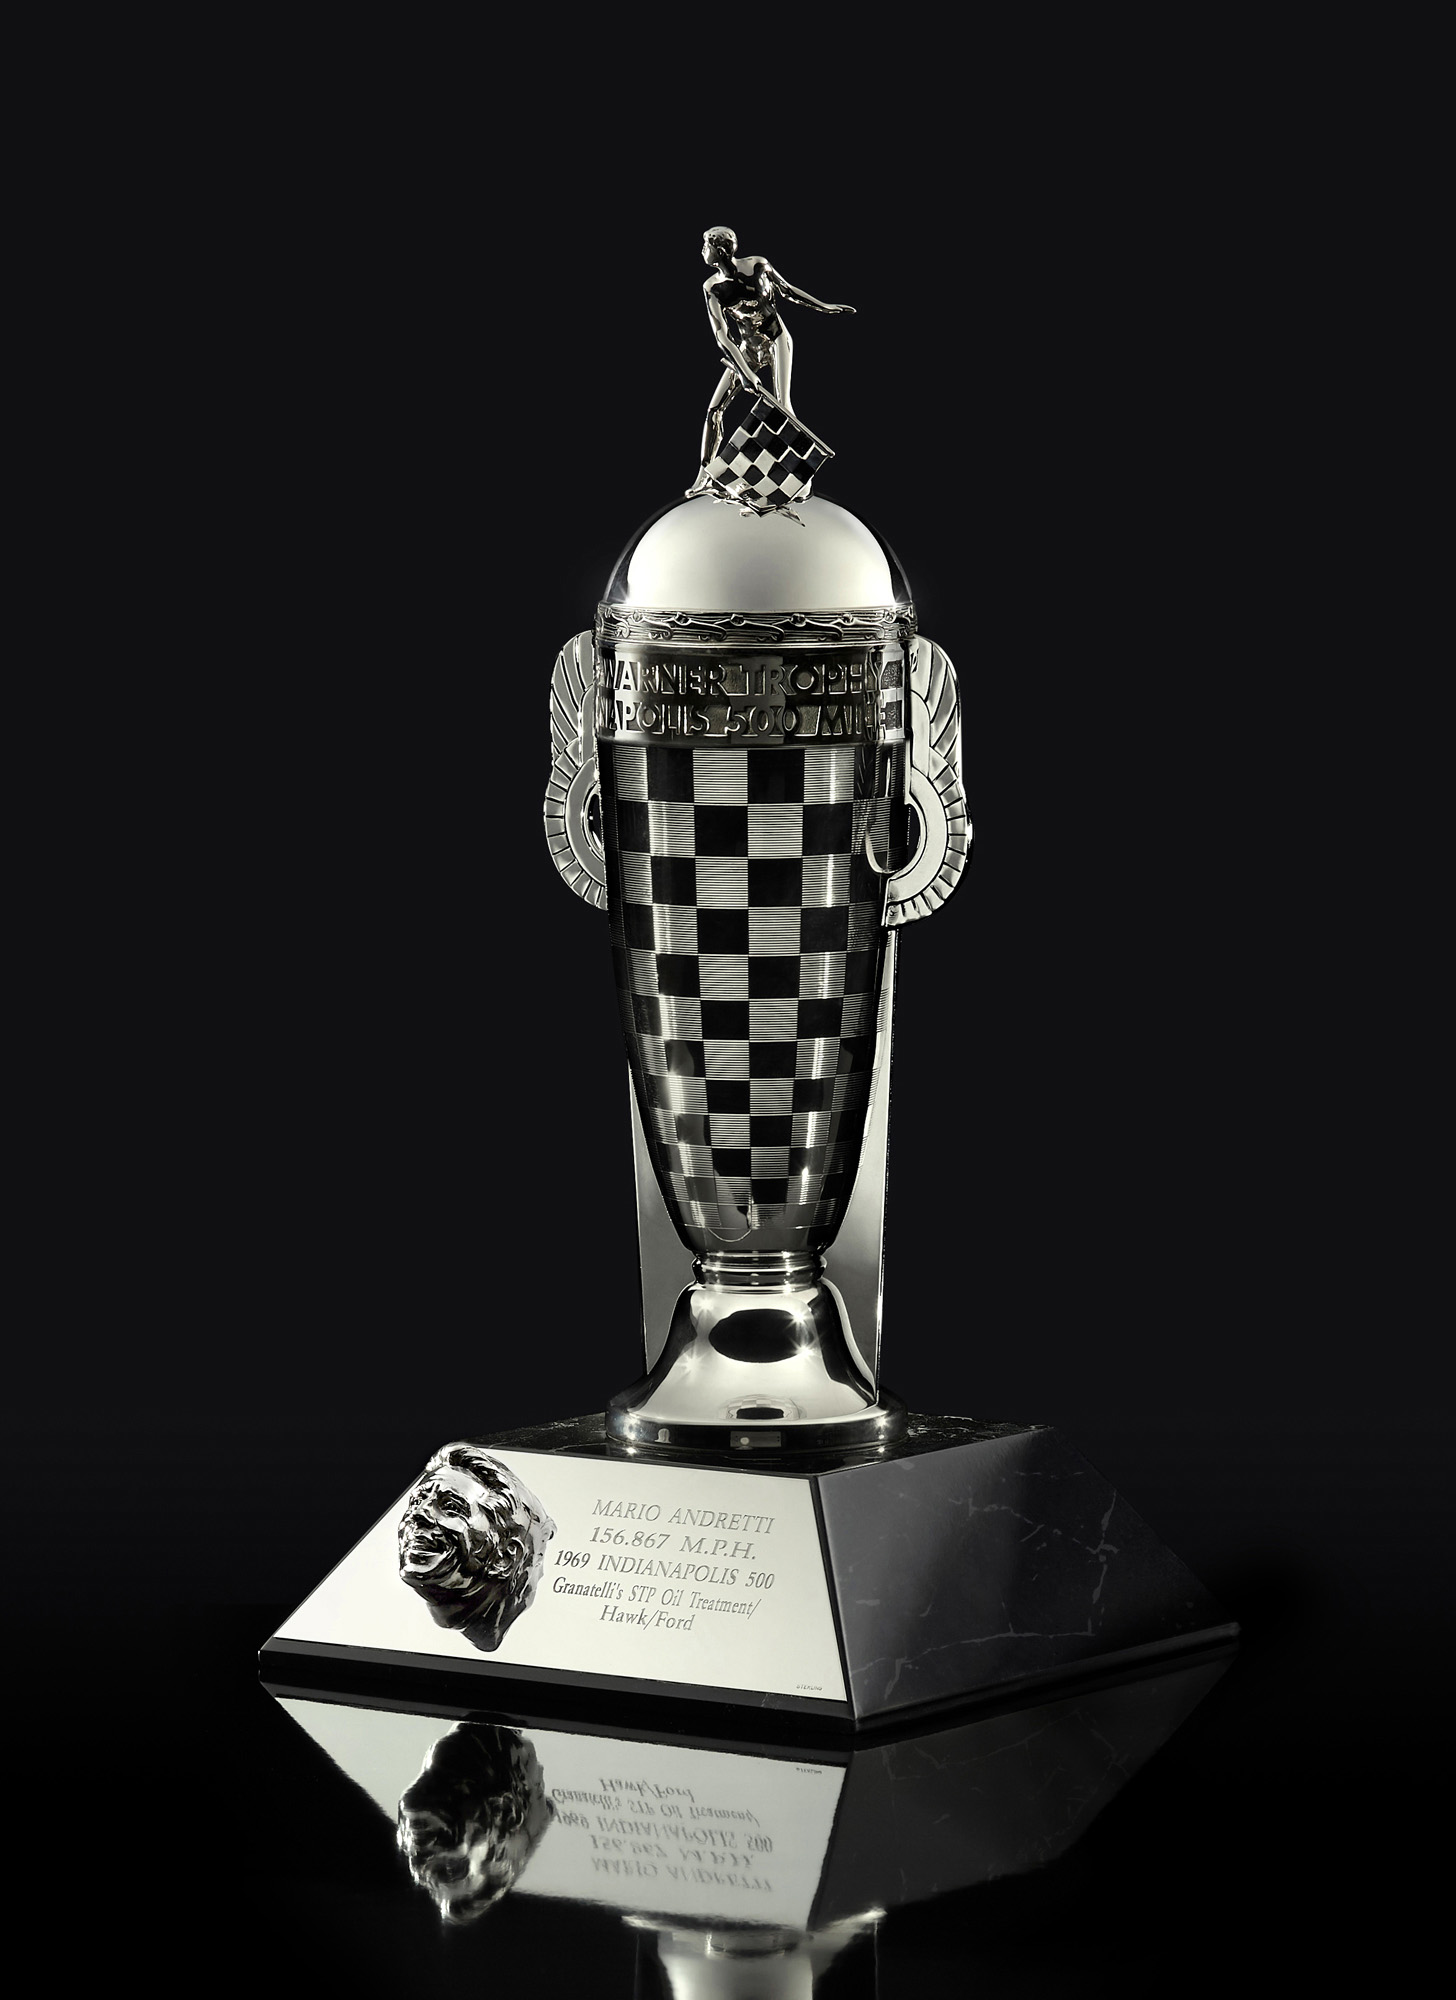 Mario Andretti’s Championship Driver’s Trophy (Baby Borg), a gift from BorgWarner in celebration of the 50th anniversary of his Indianapolis 500 win